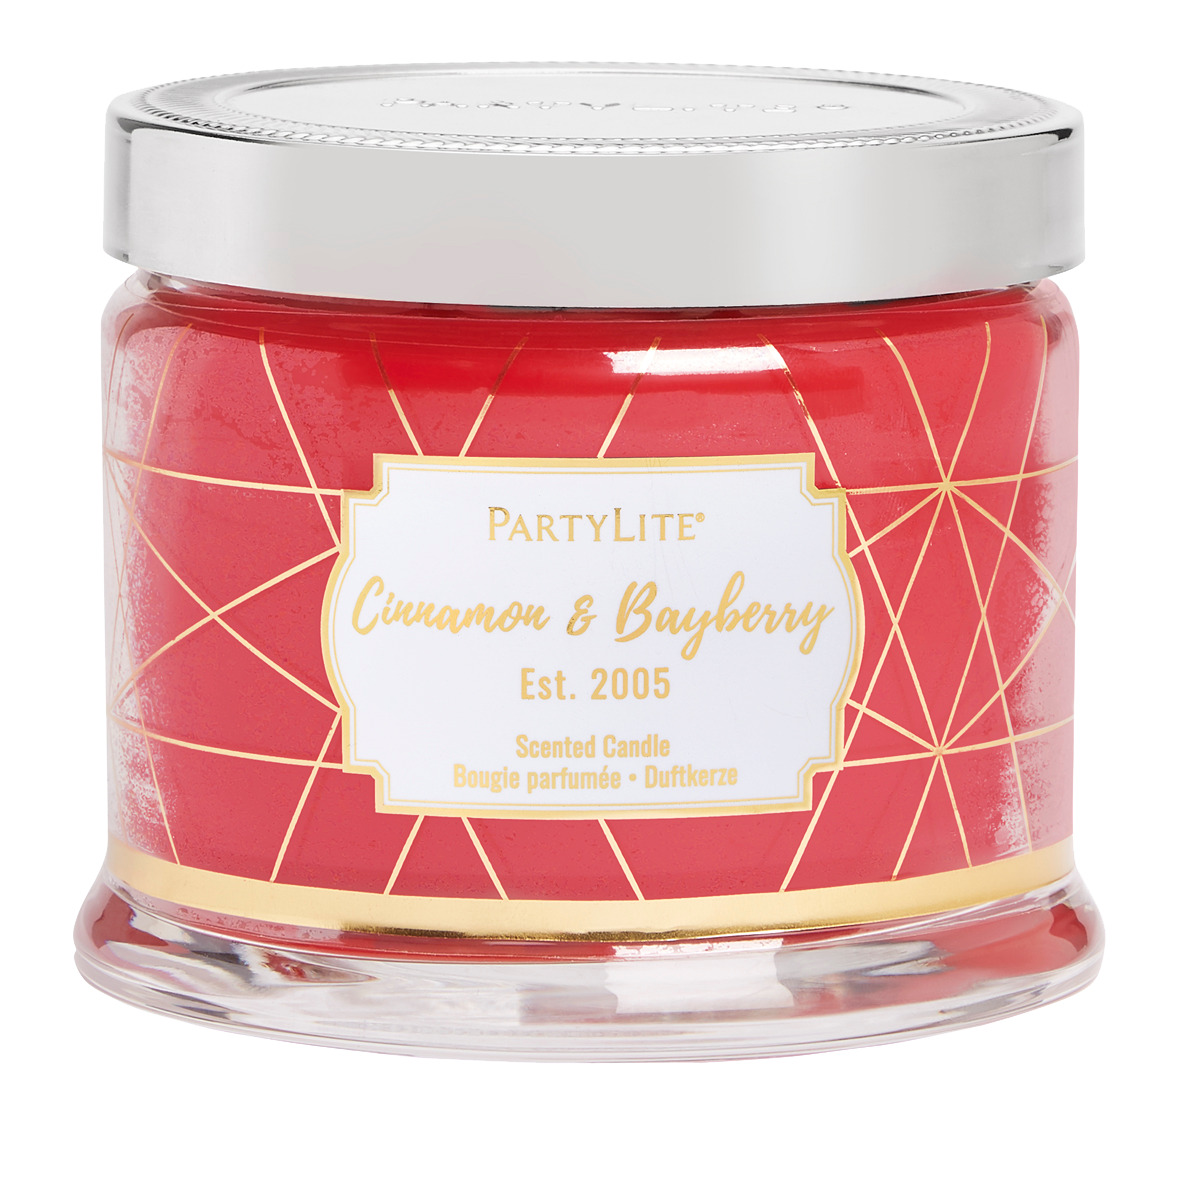 Partylite CINNAMON & BAYBERRY SIGNATURE 3-wick JAR CANDLE  BRAND NEW  